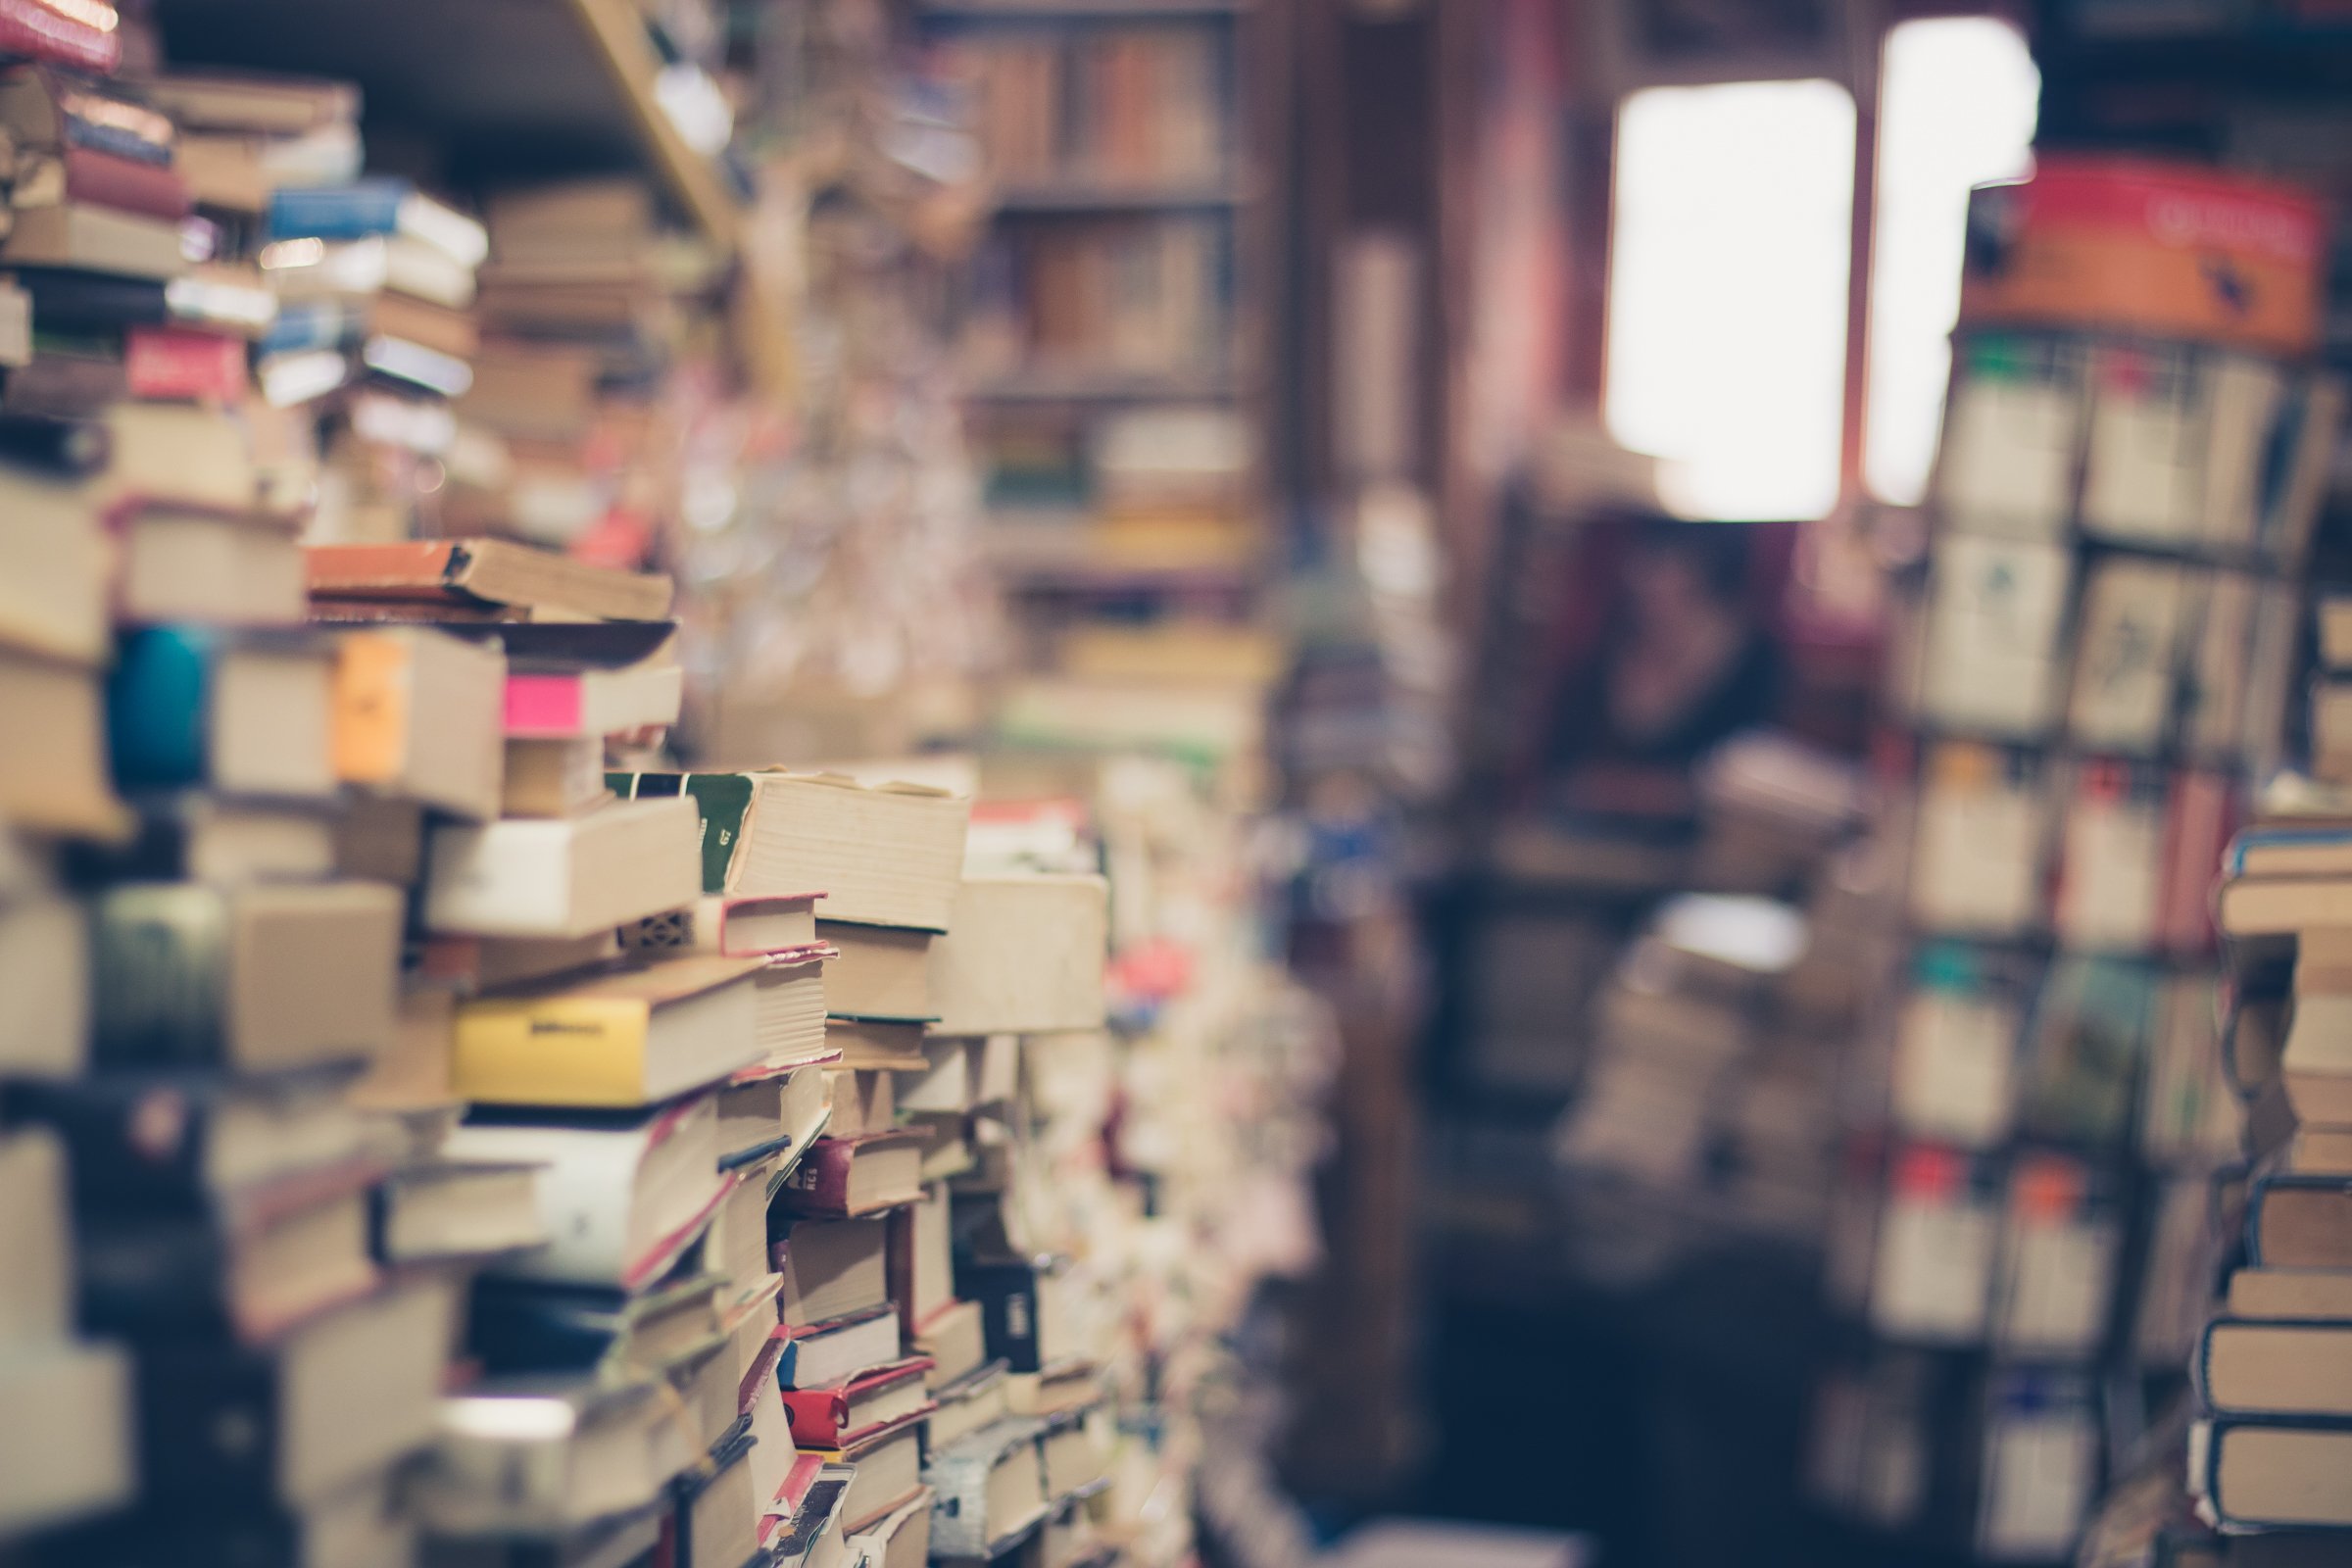 What Hoteliers Could Learn from Booksellers